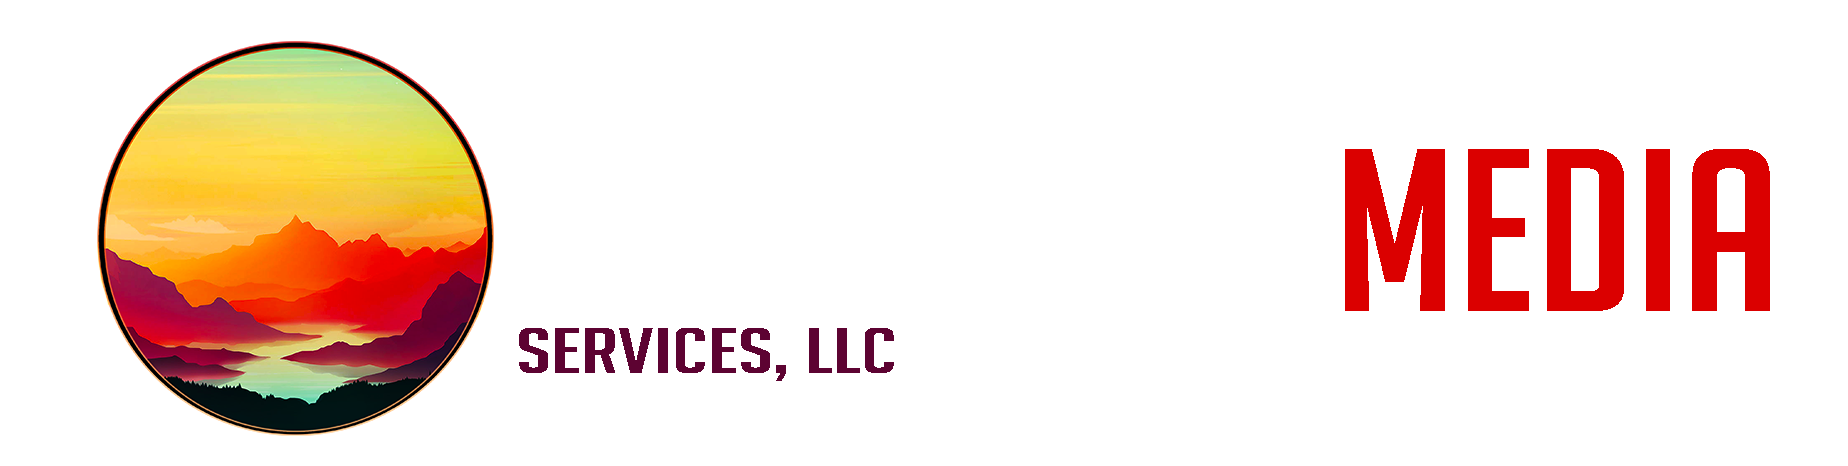 Rockledge Media Services